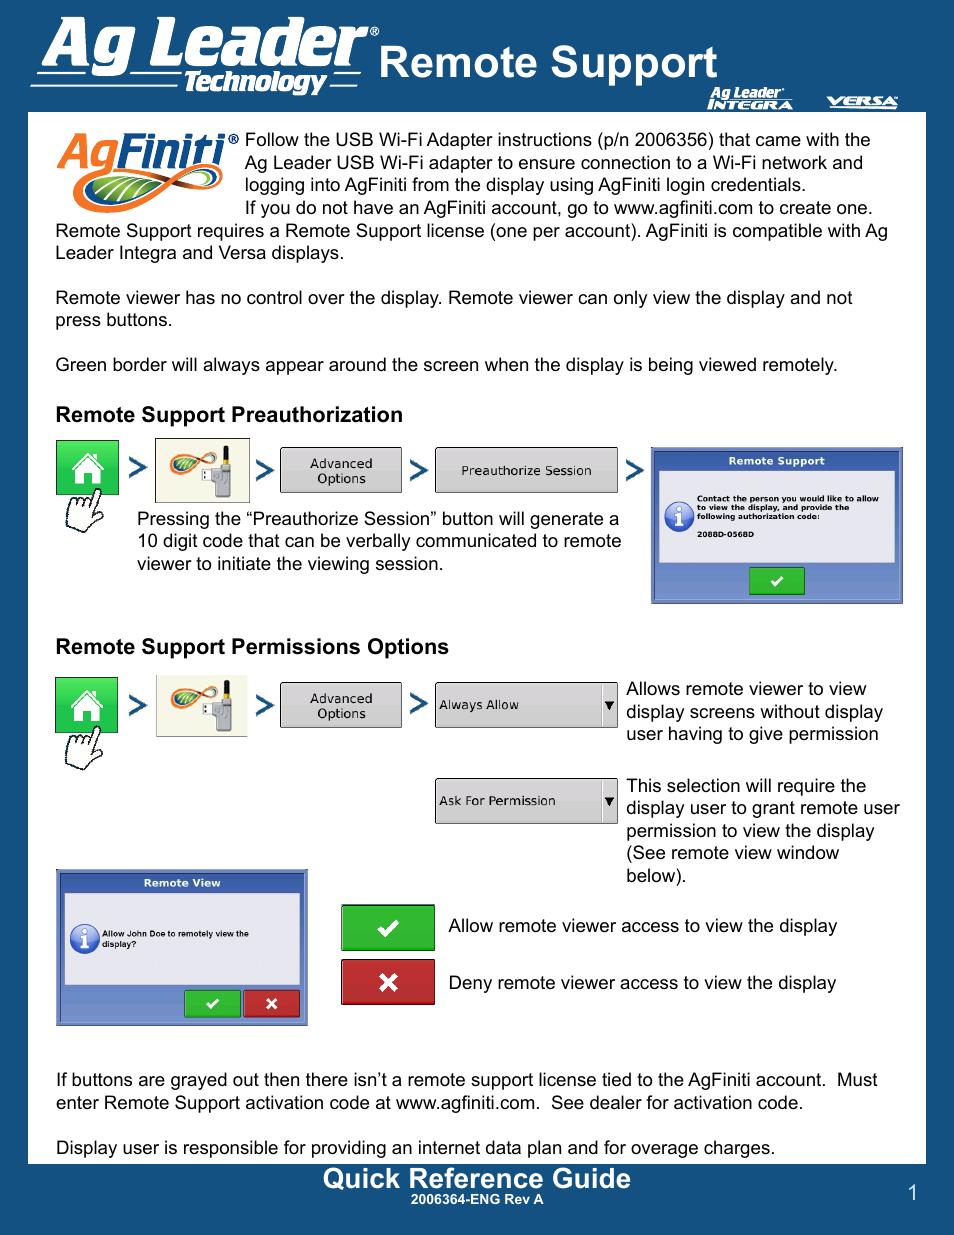 Integra DirectCommand Display Remote Support Quick Reference Guides